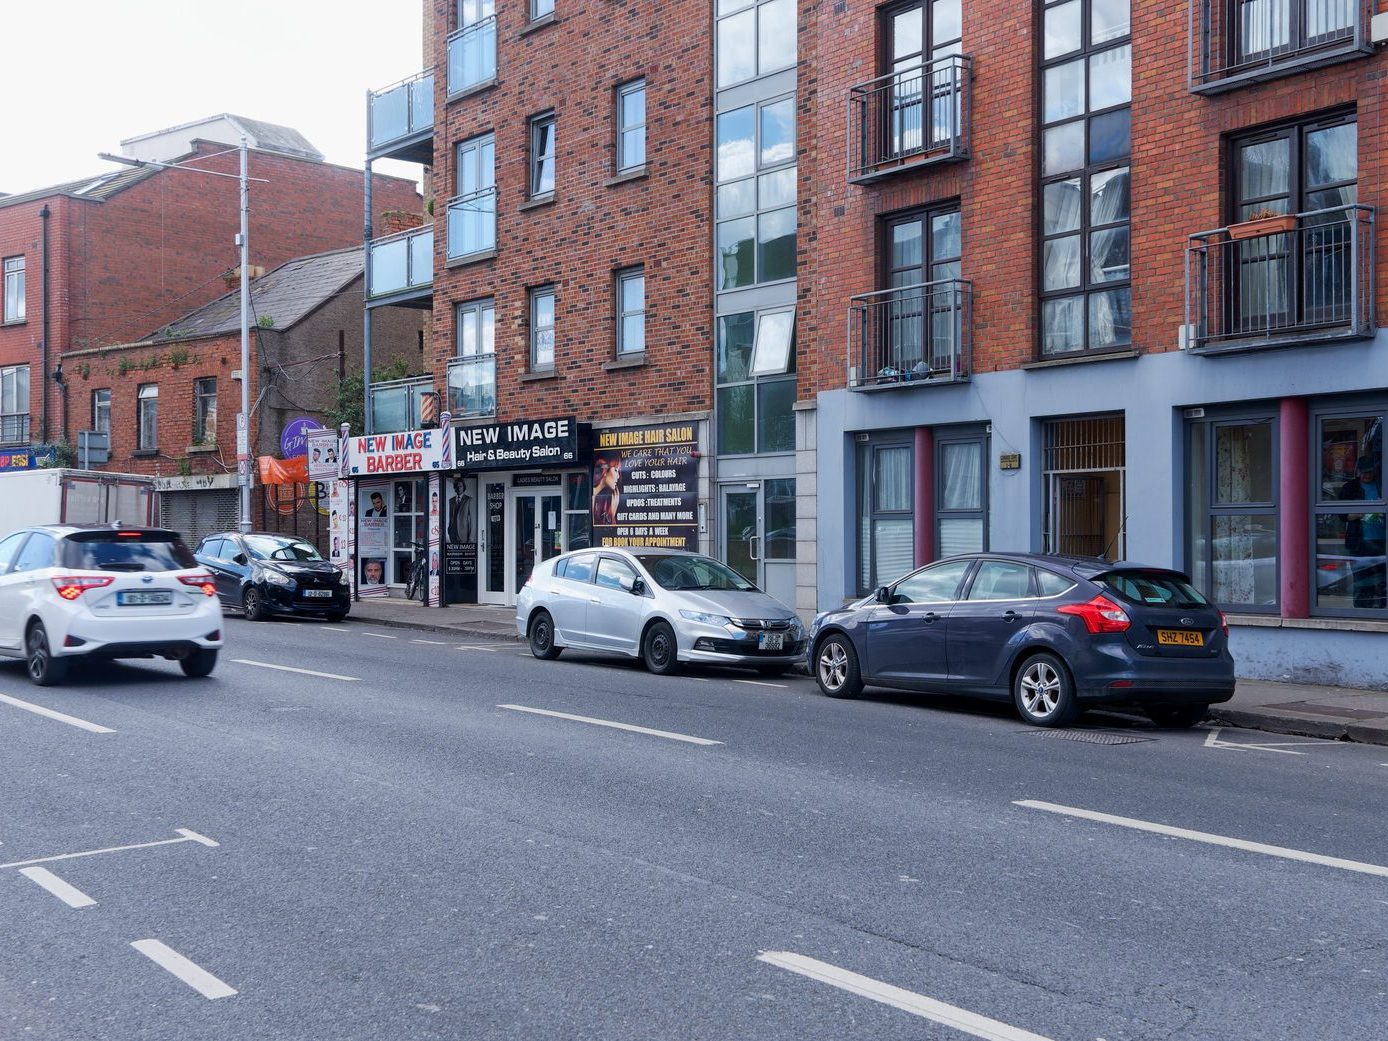 I WALKED ALONG NEW STREET SOUTH AND CLANBRASSIL STREET 001